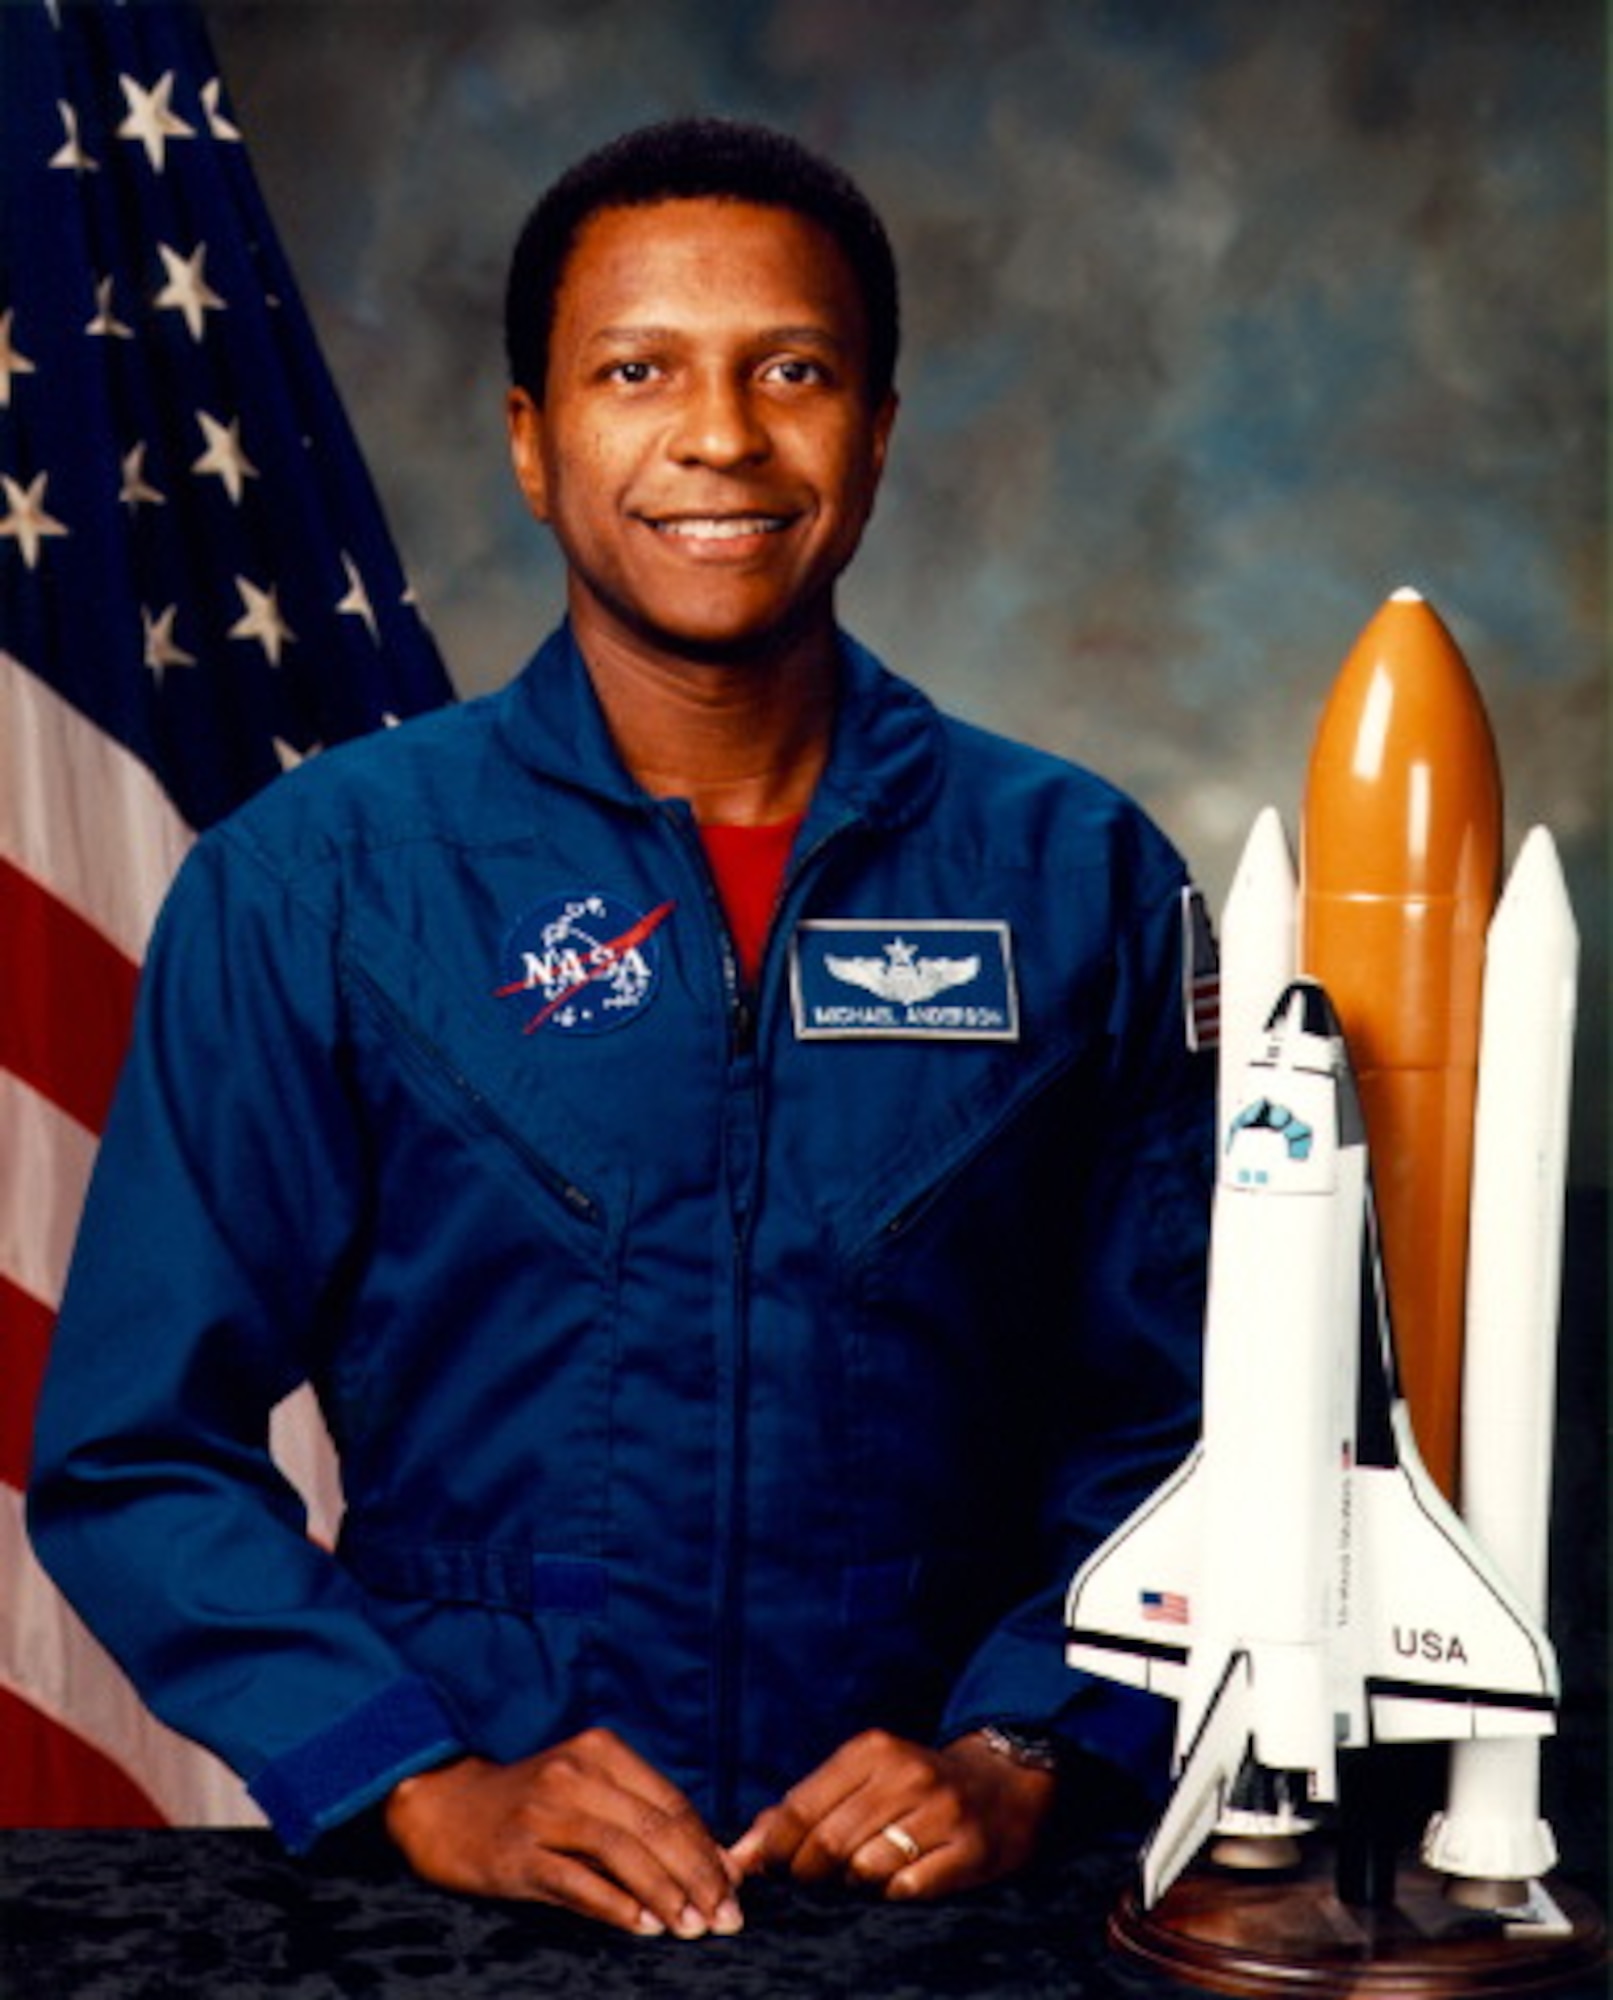 Michael P. Anderson, an African-American astronaut who died aboard the space shuttle Columbia in February 2003.